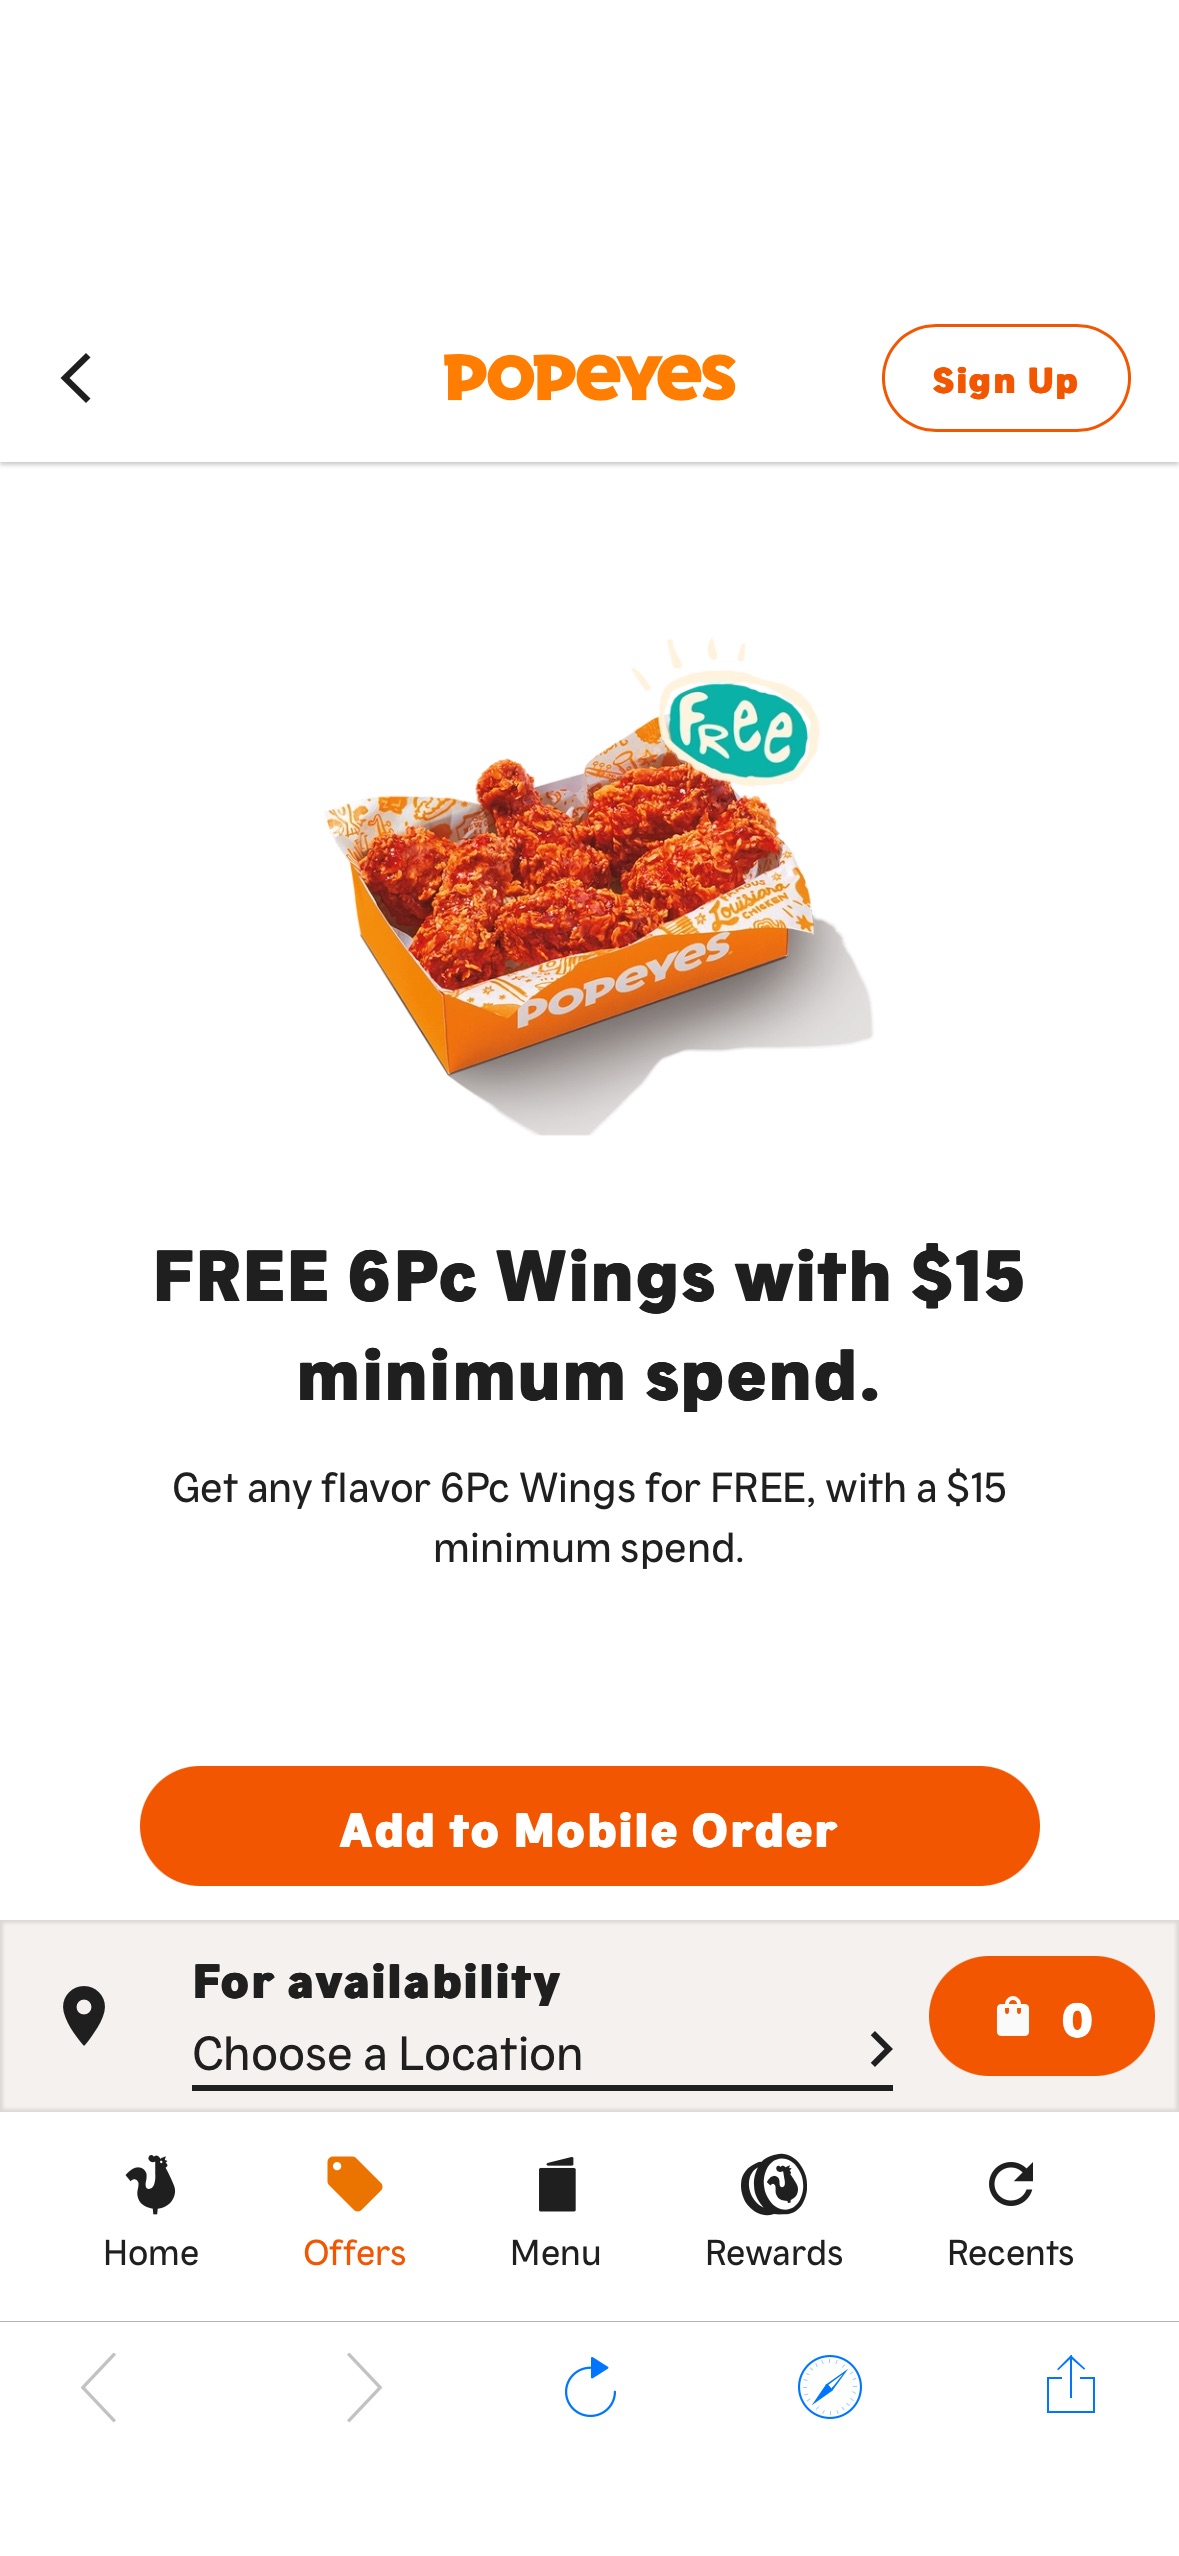 FREE 6Pc Wings with $15 minimum spend.